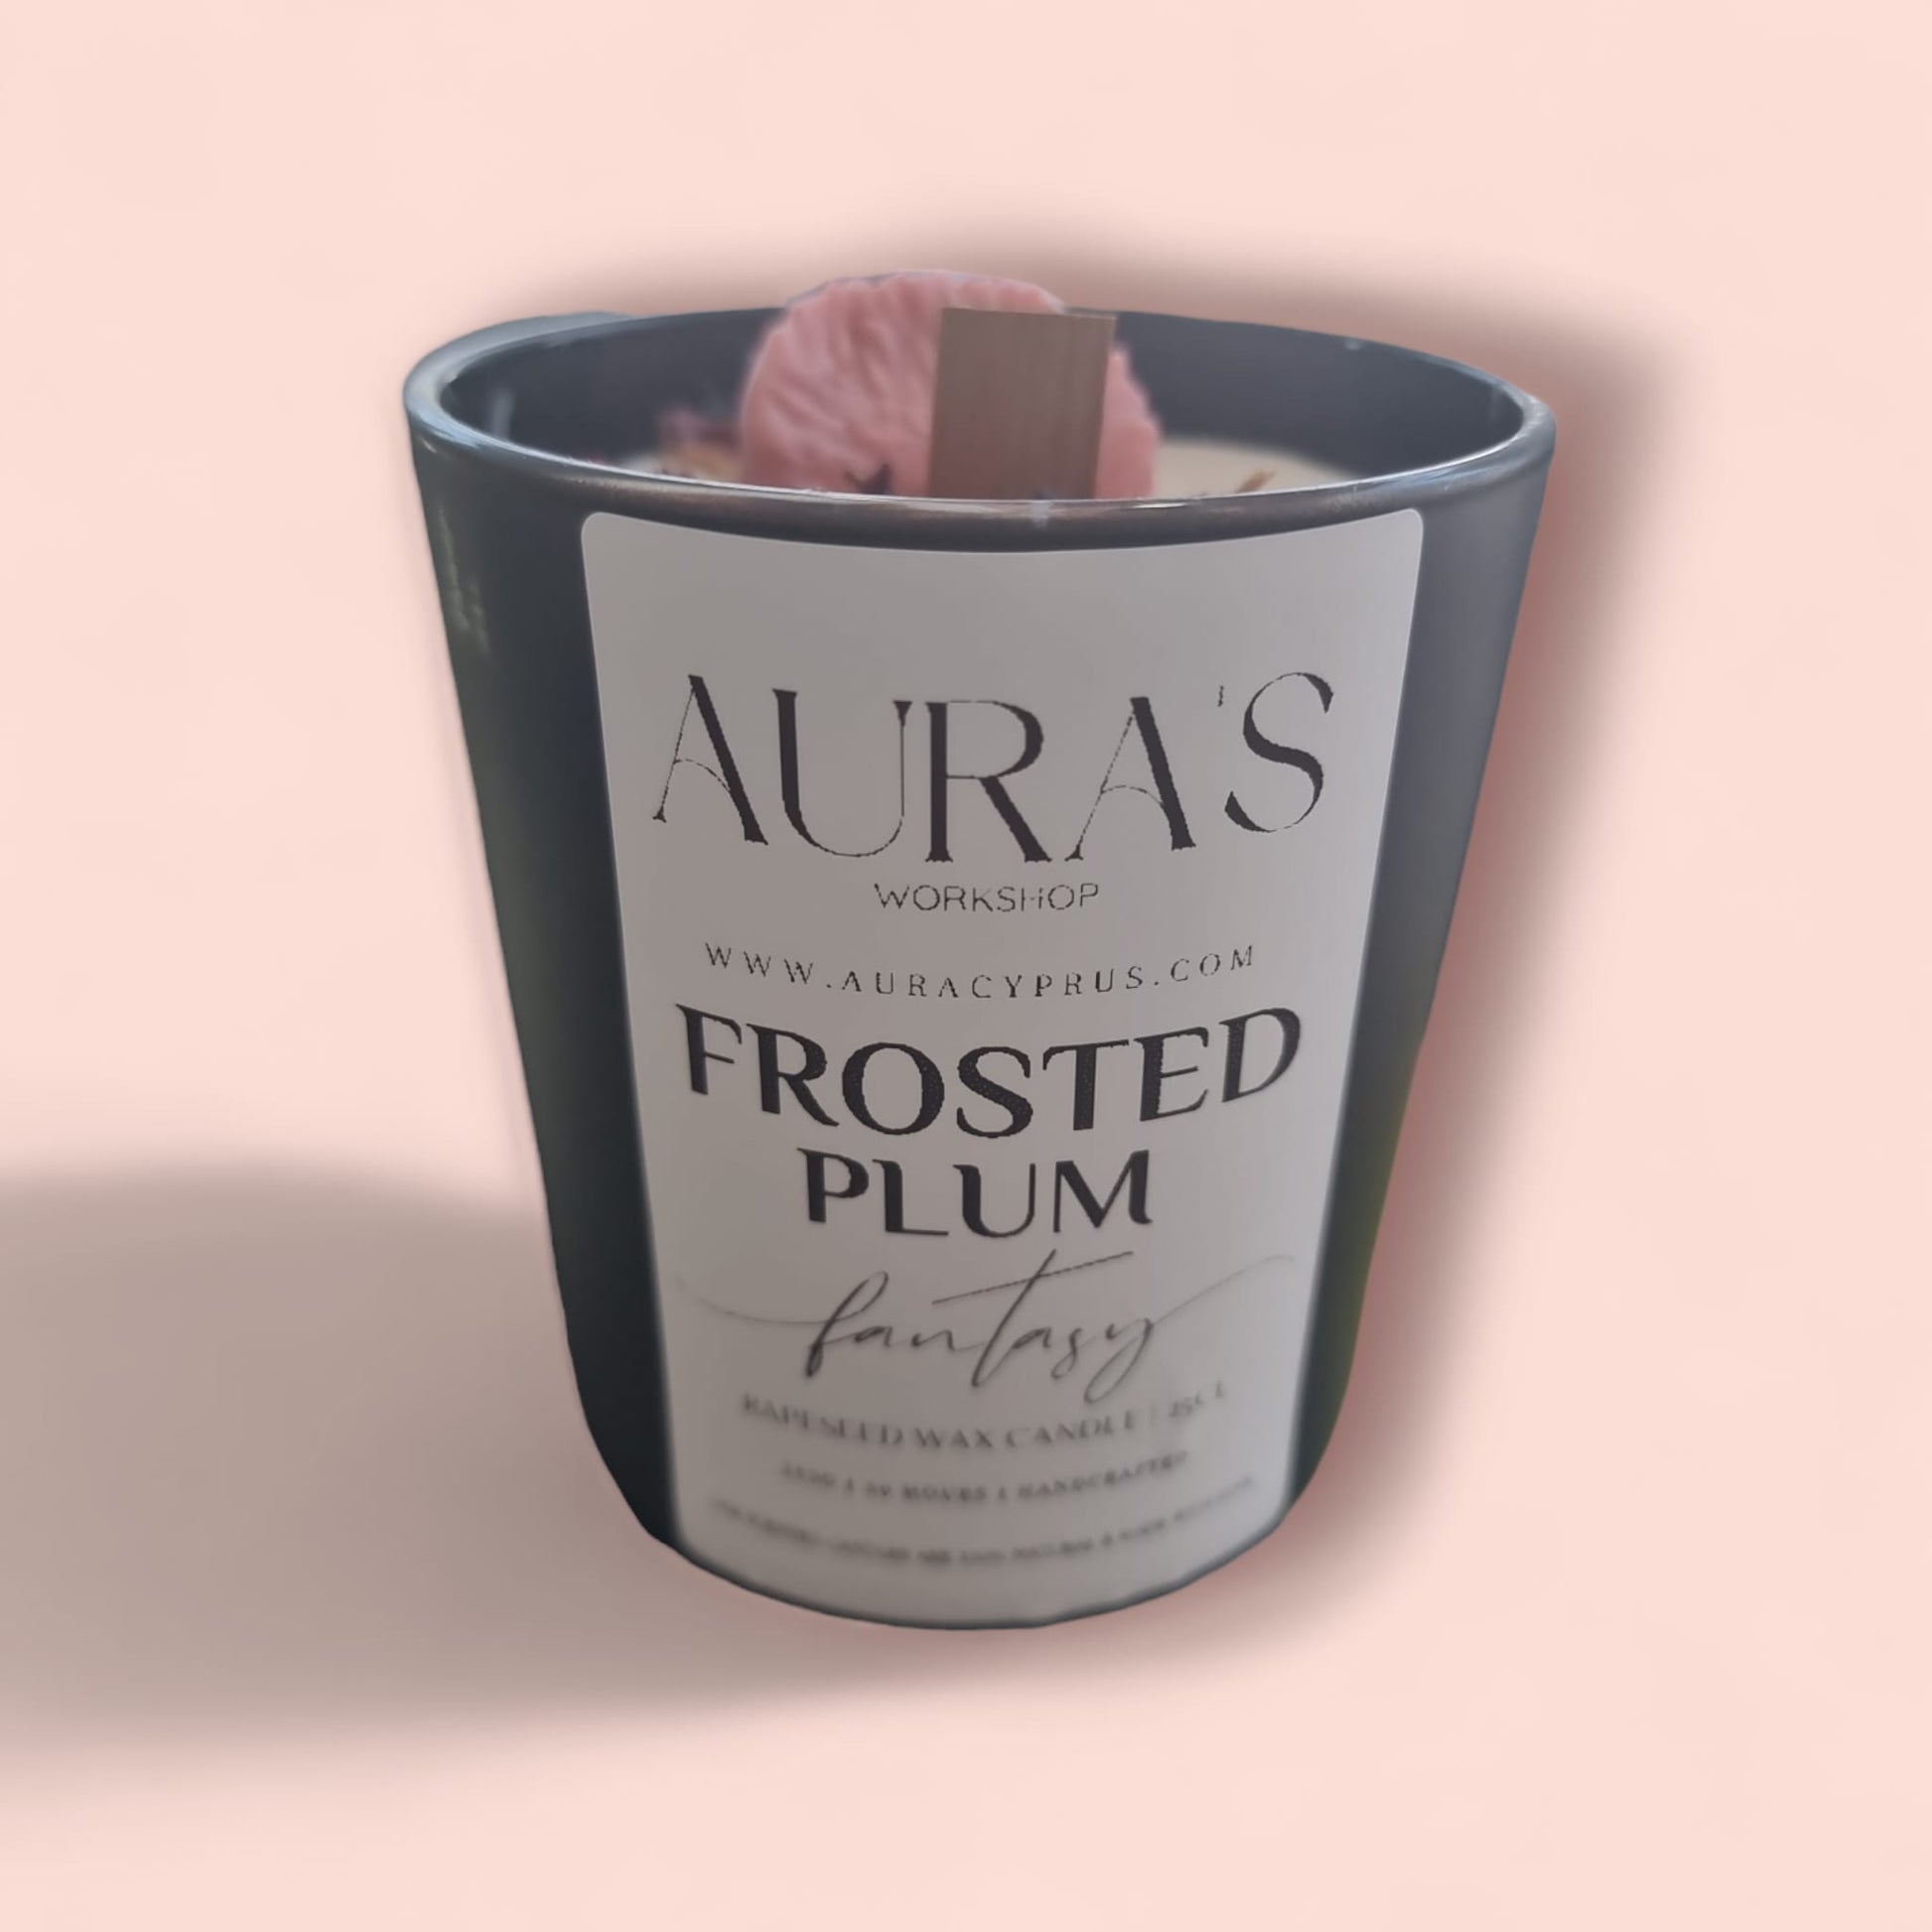 Frosted Plum Fantasy Scented Candle - Auras Workshop  -  Candles -   - Cyprus & Greece - Wholesale - Retail #